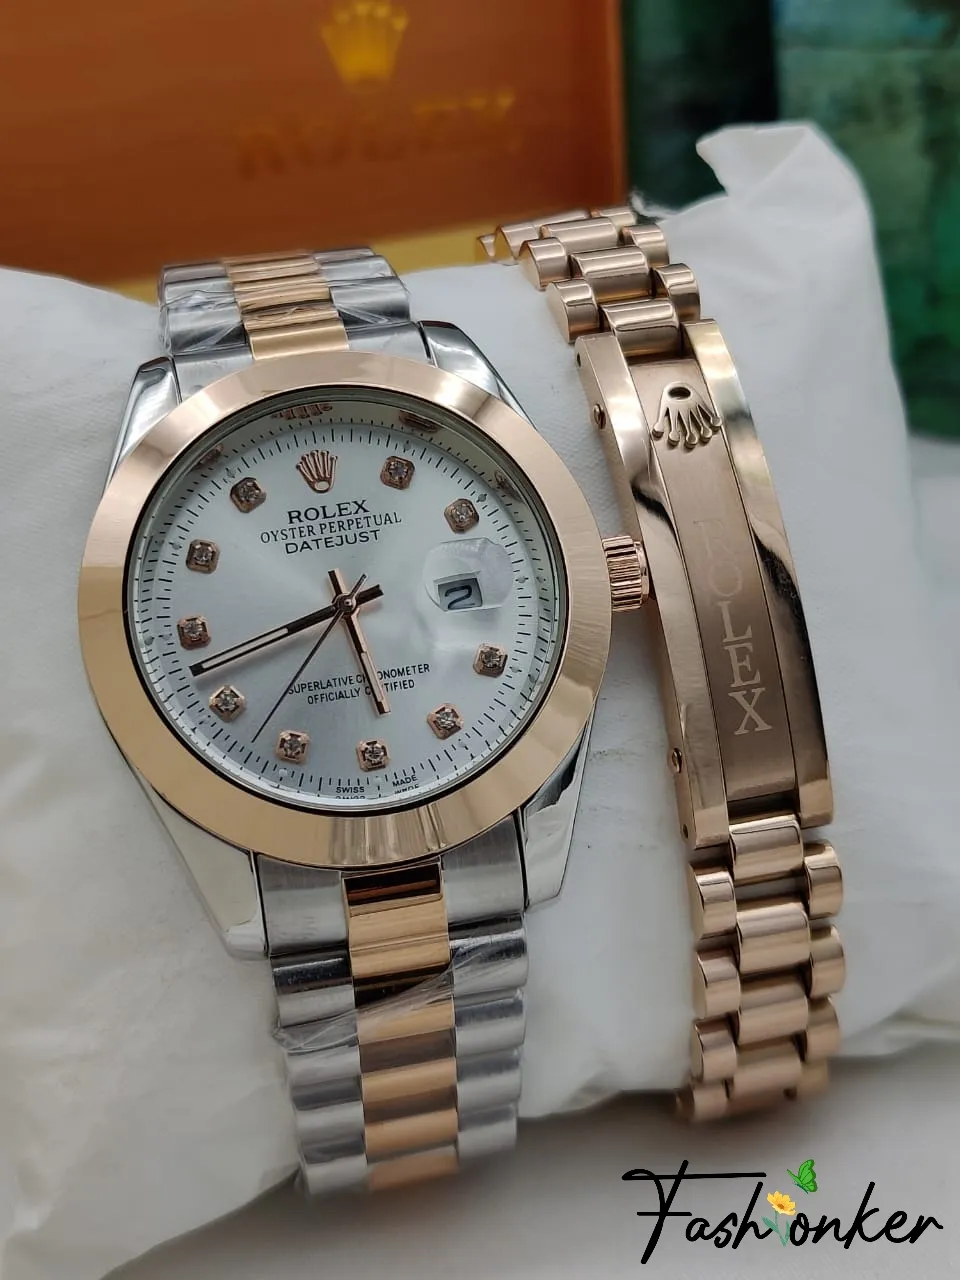 Best Price Rolex Oyster Datejust Twotone Watch and Bracelet Combo